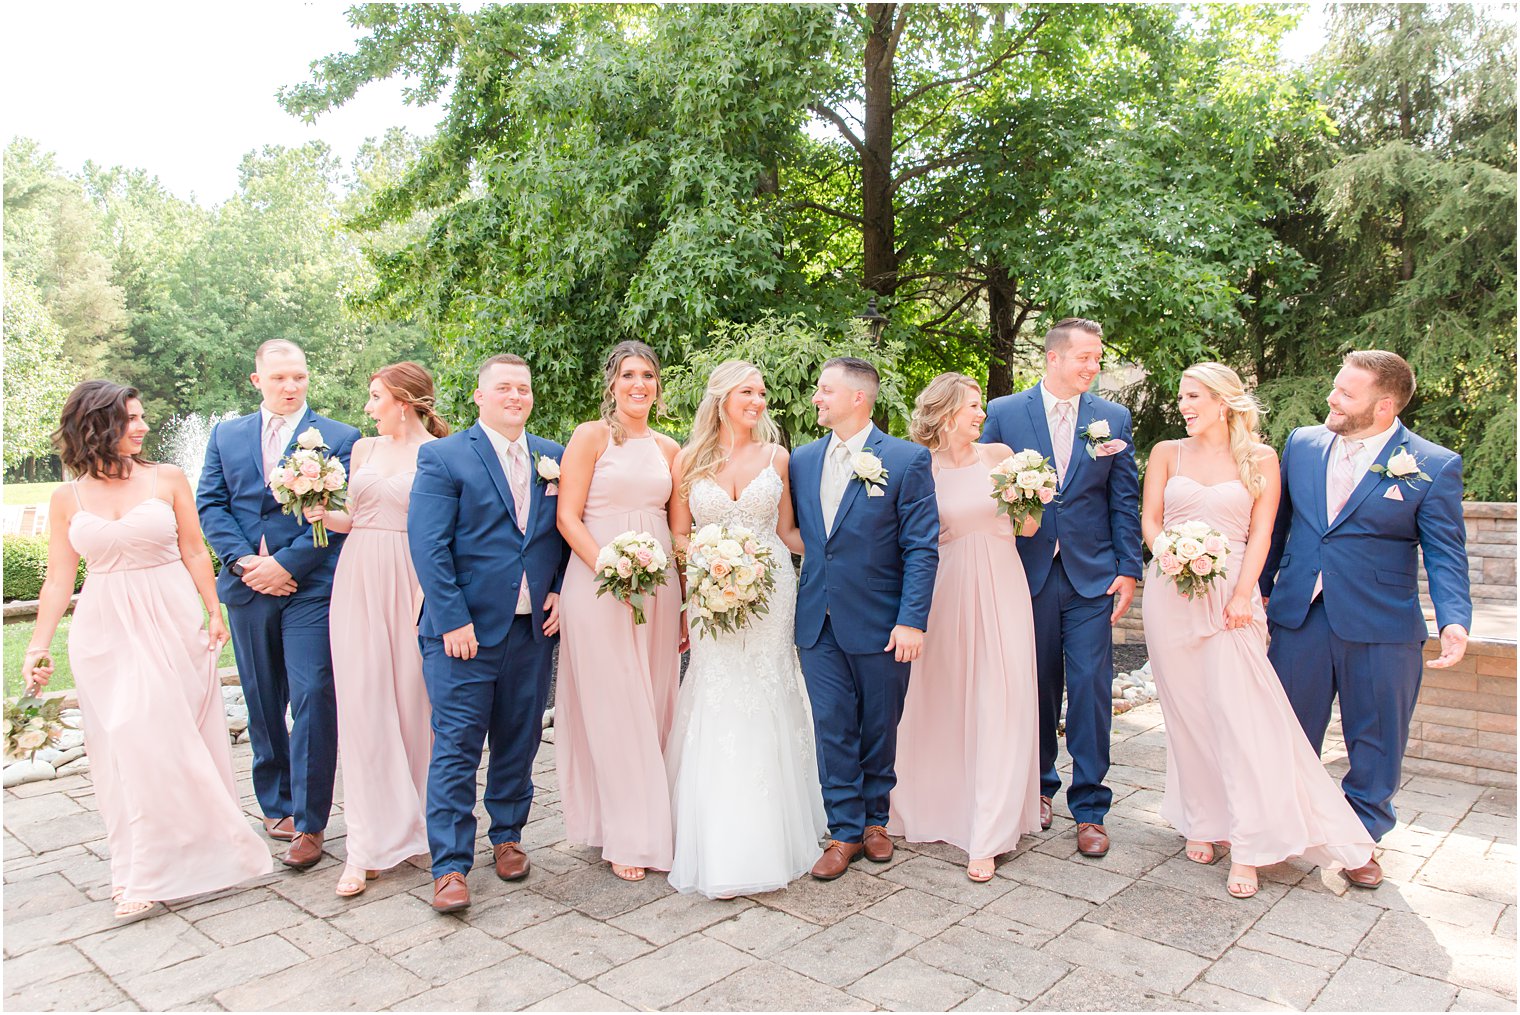 wedding party in navy blue and pink dresses walk with bride and groom